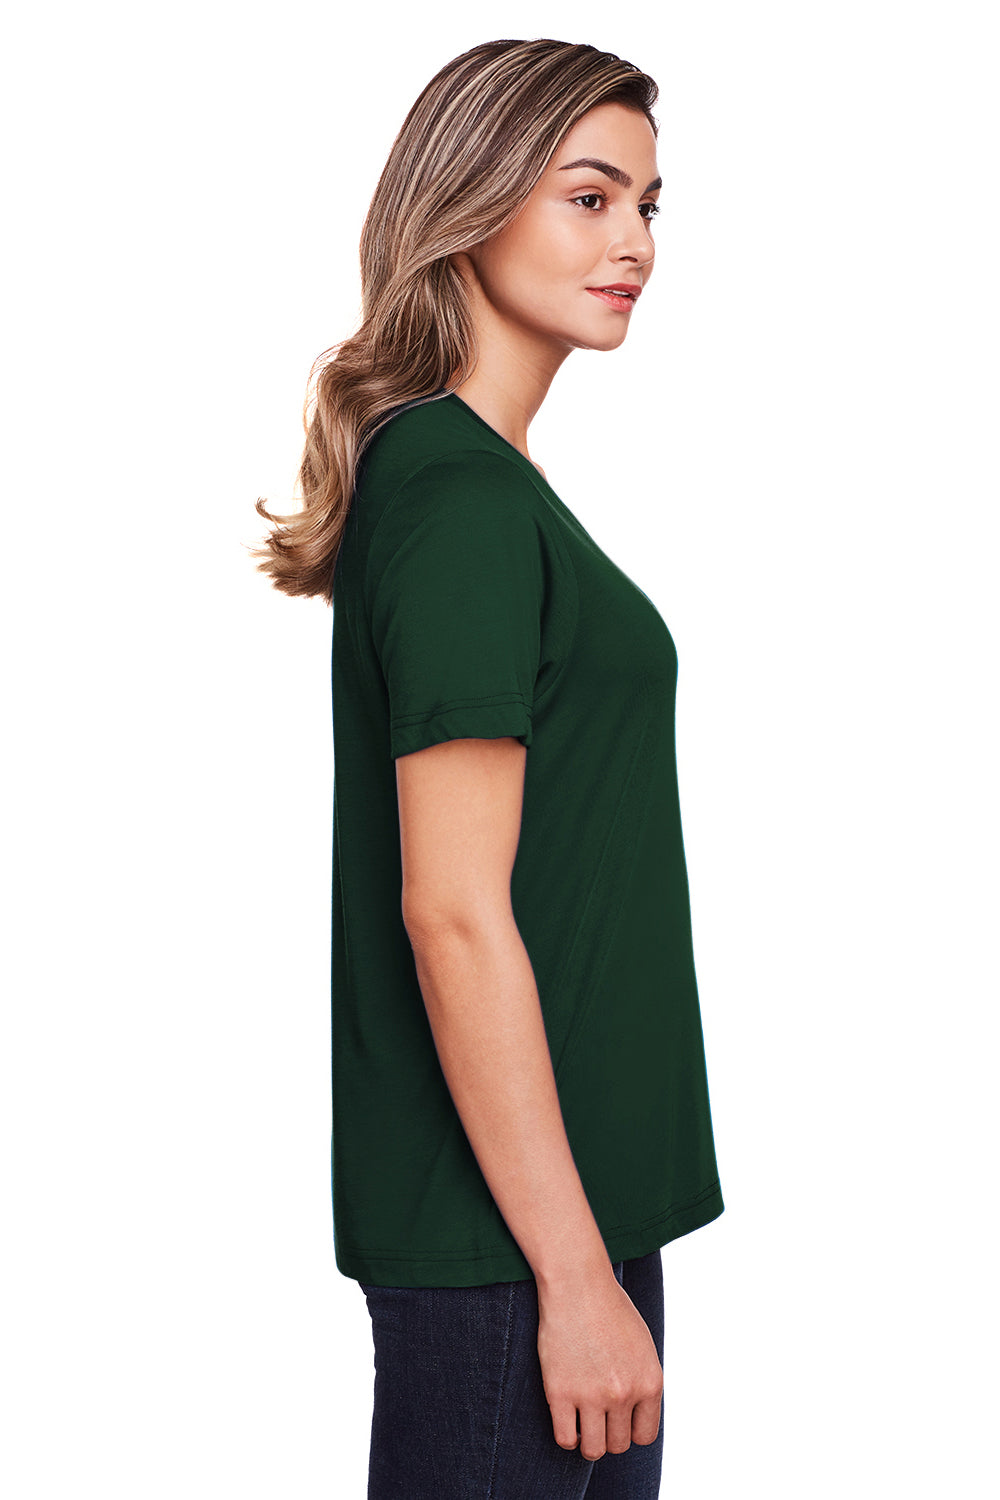 Core 365 CE111W Womens Fusion ChromaSoft Performance Moisture Wicking Short Sleeve Scoop Neck T-Shirt Forest Green Side